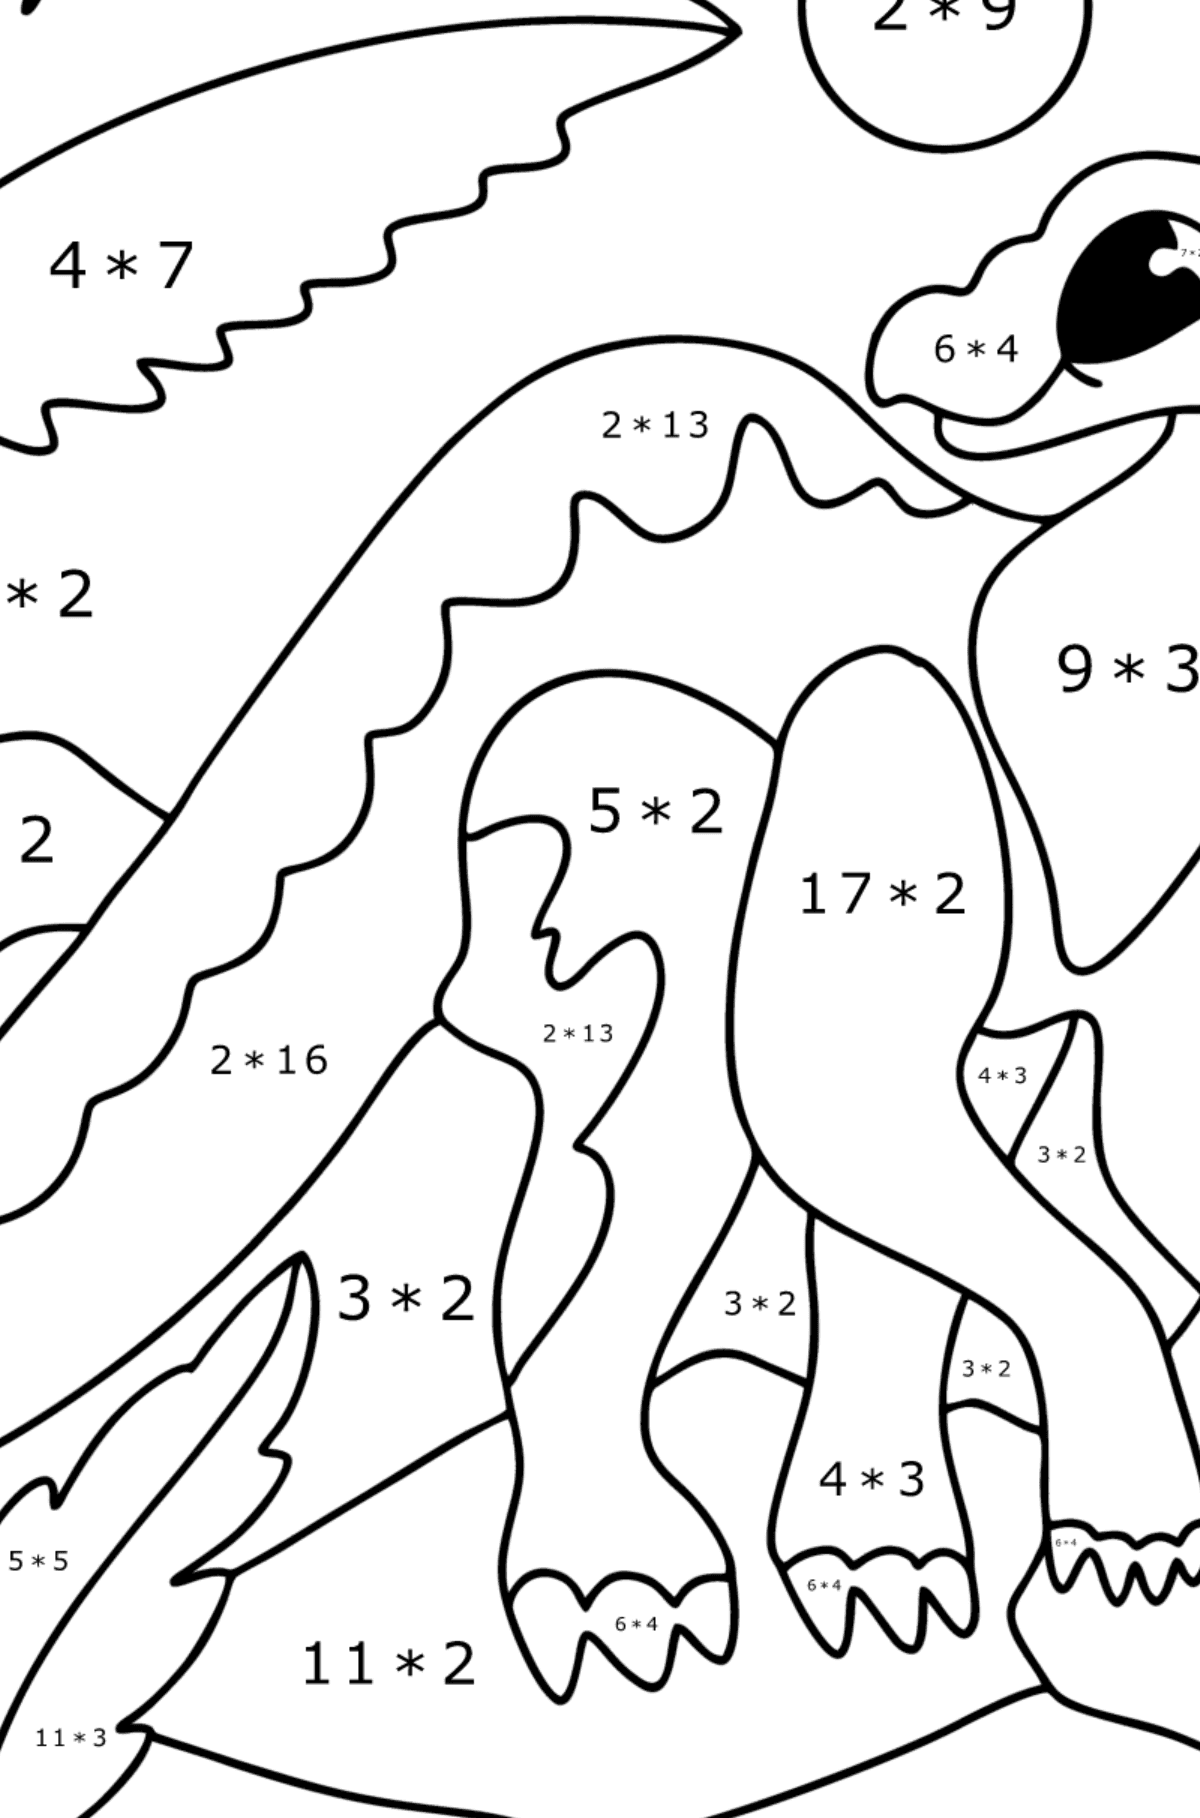 Iguanodon coloring page - Math Coloring - Multiplication for Kids